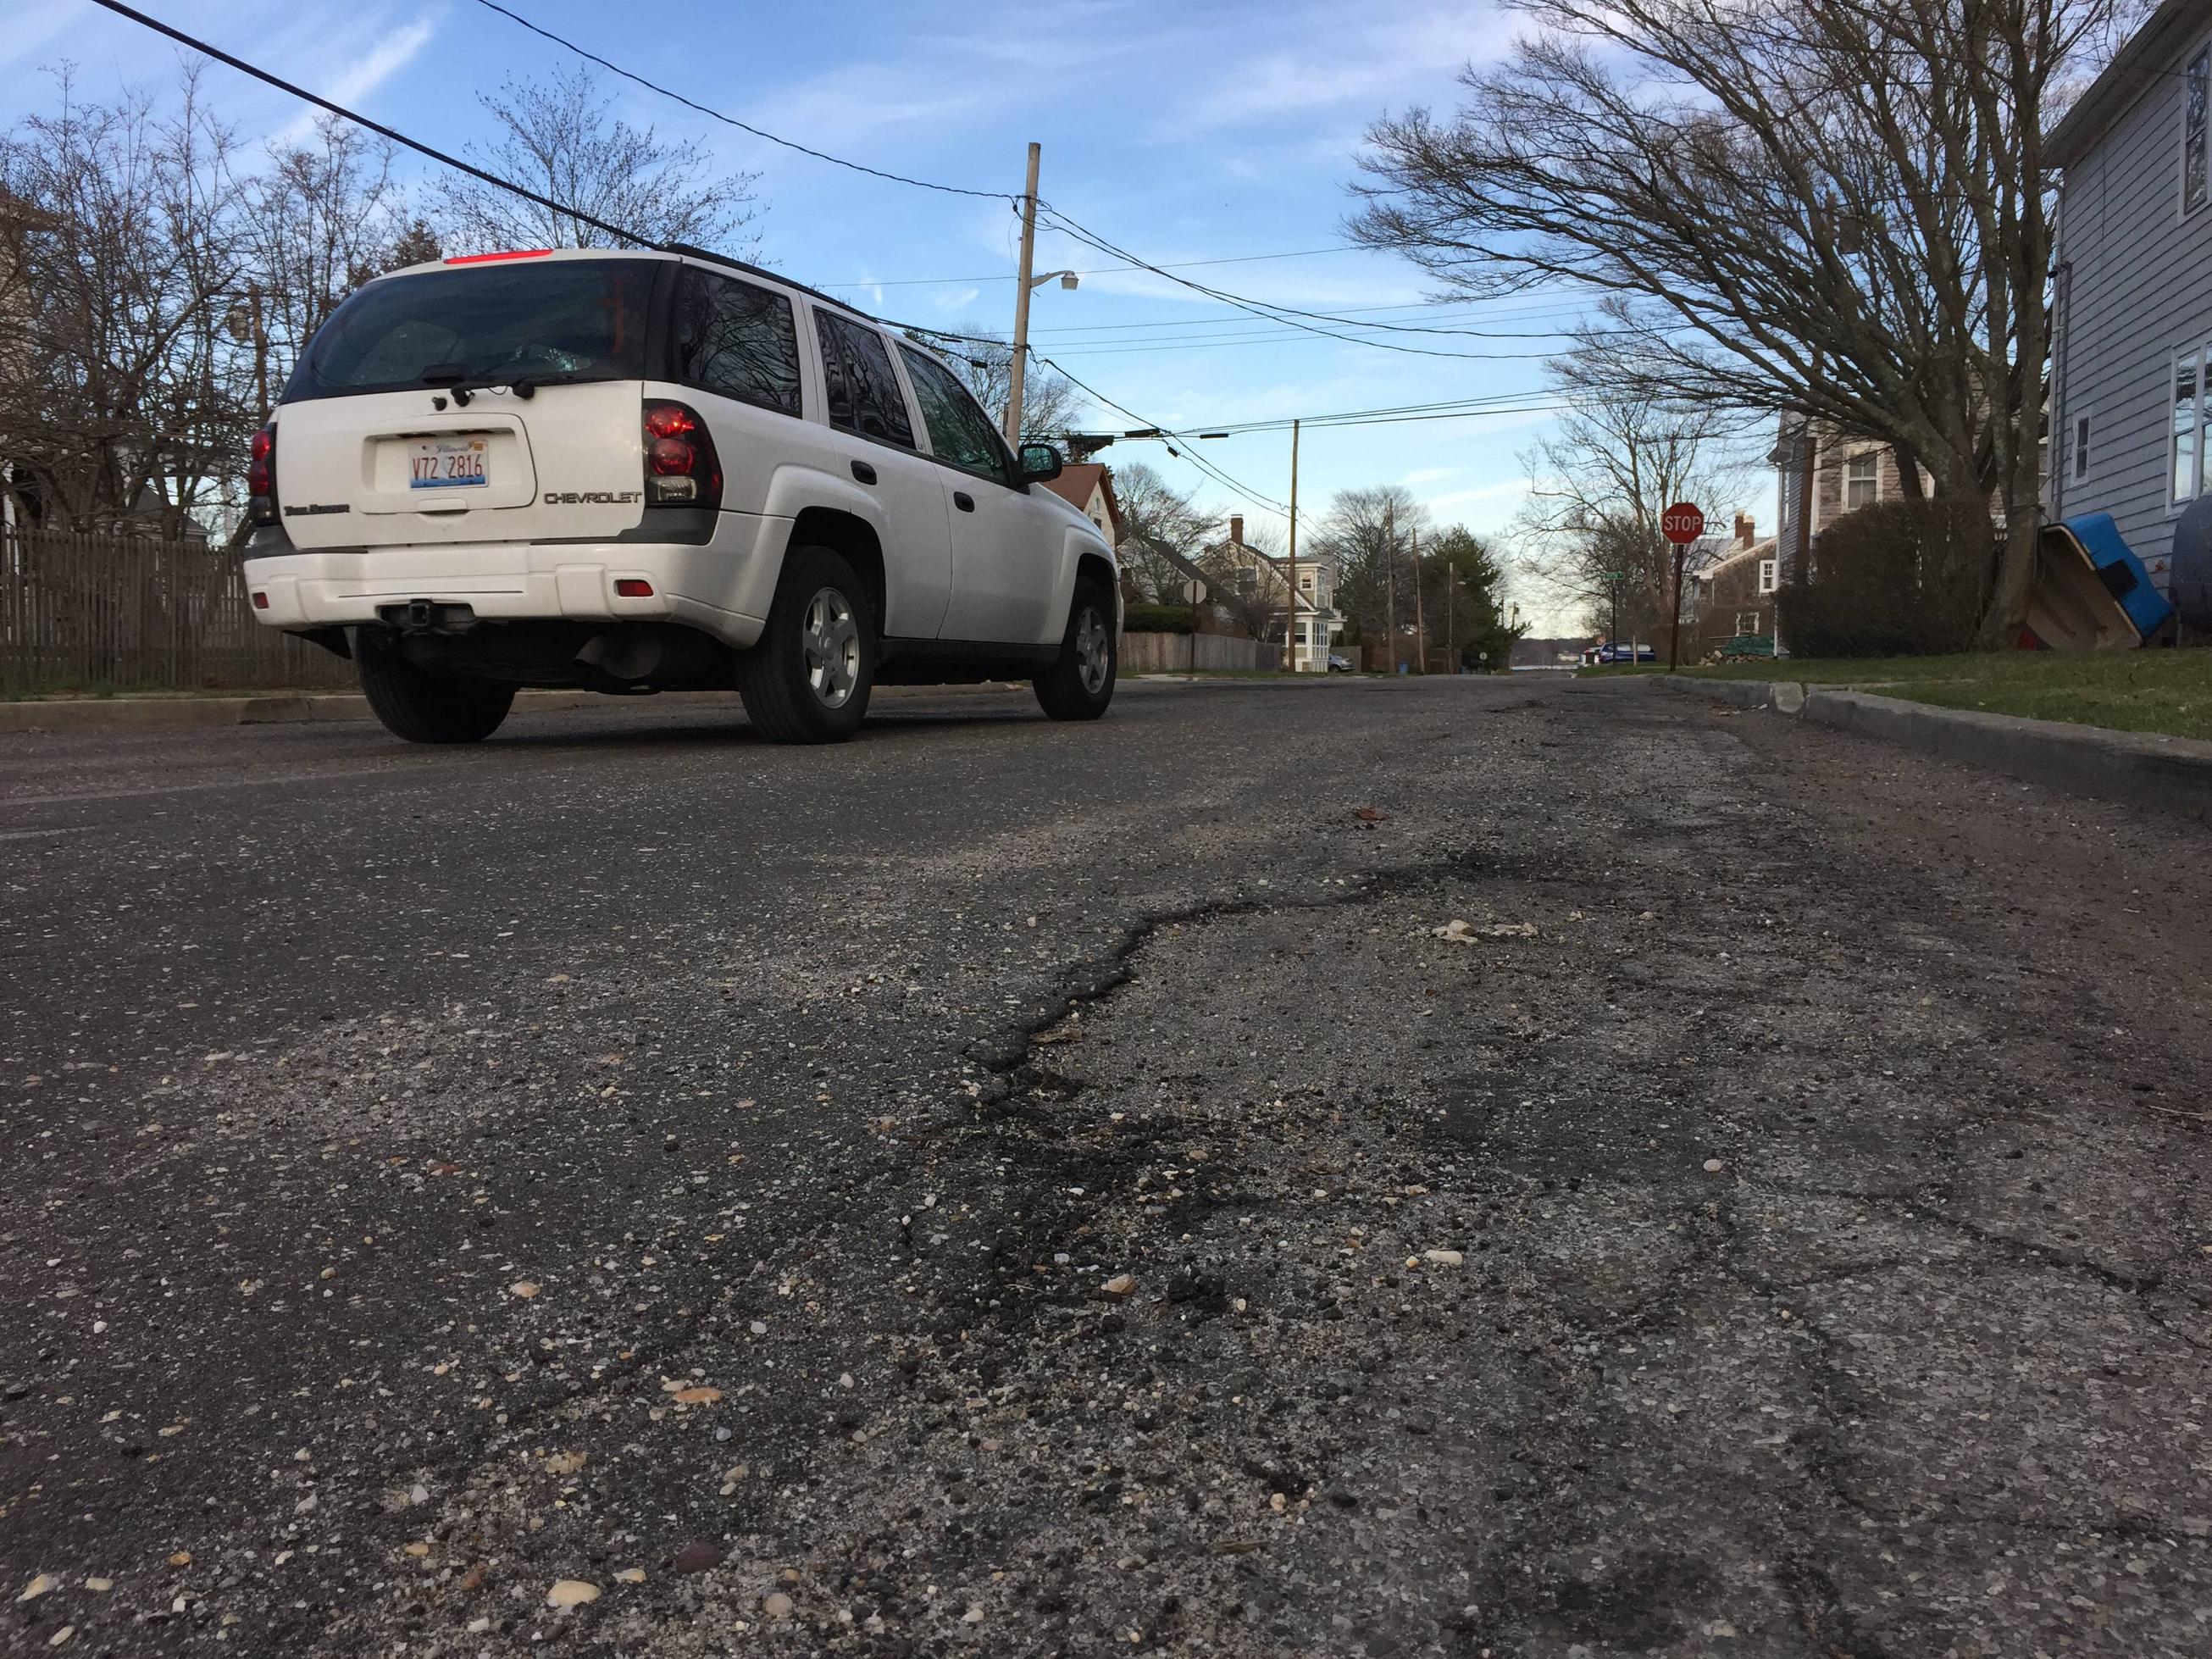 Potholes, a major campaign issue, are about to get fixed in Greenport. (Credit: Paul Squire)